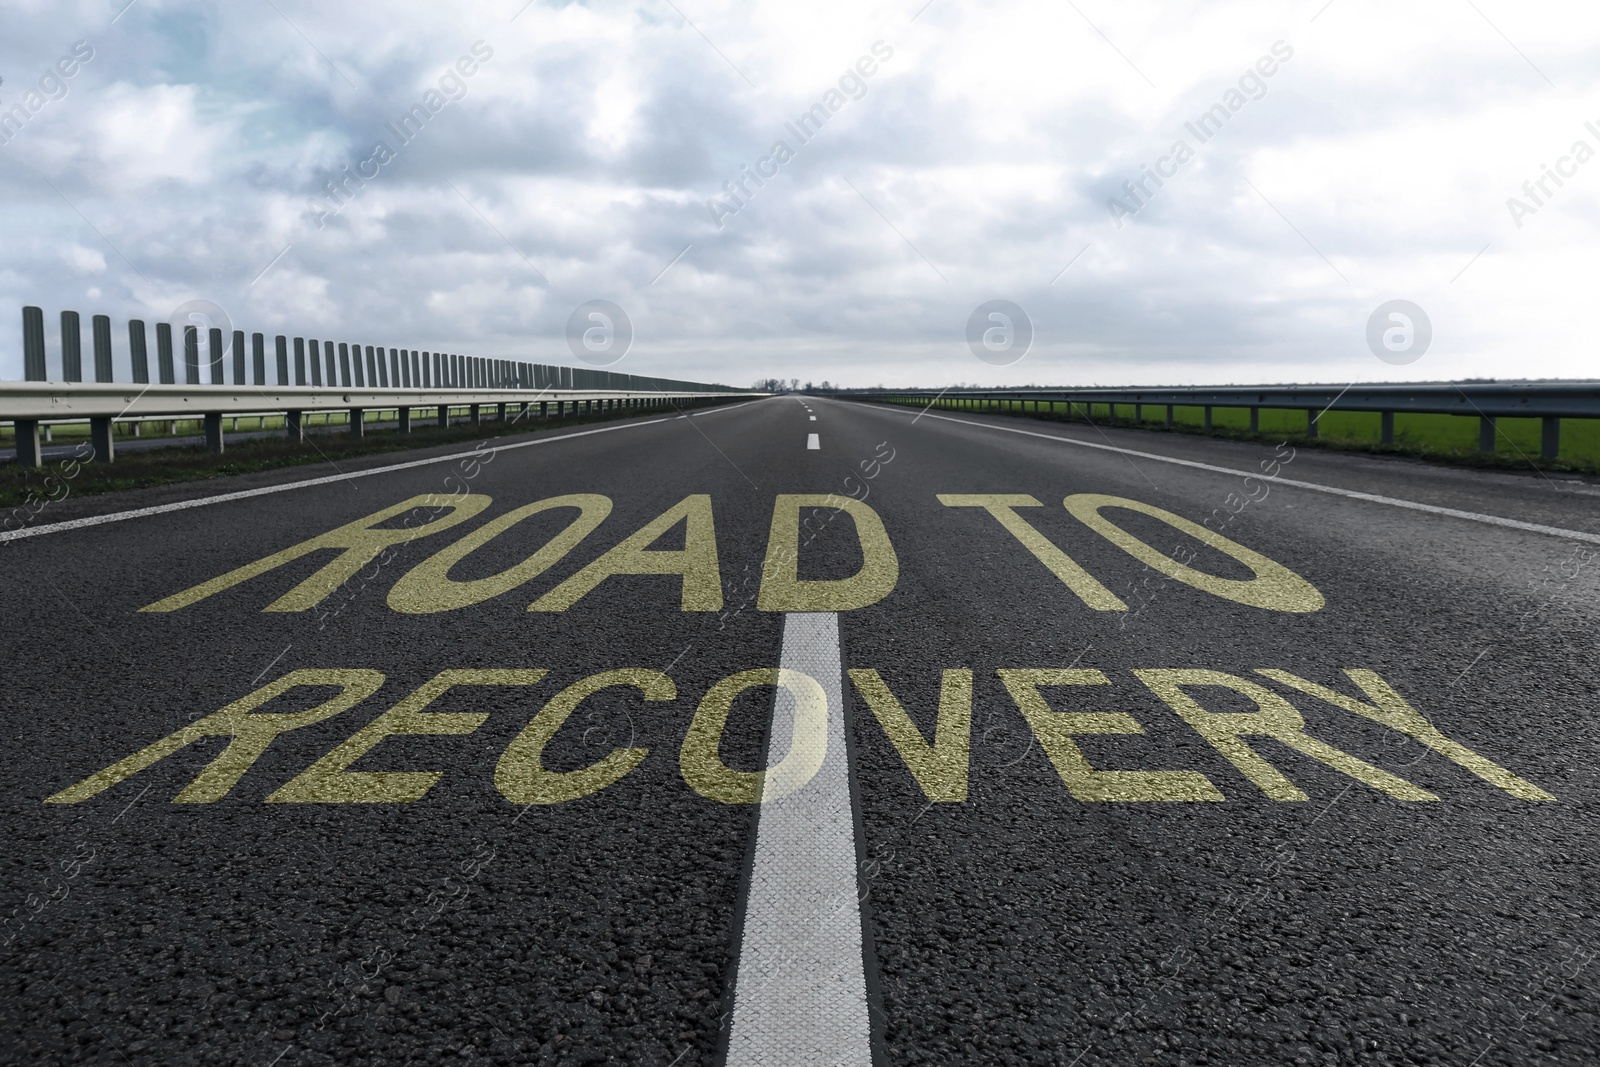 Image of Start to live without alcohol addiction. Phrase ROAD TO RECOVERY on asphalt highway